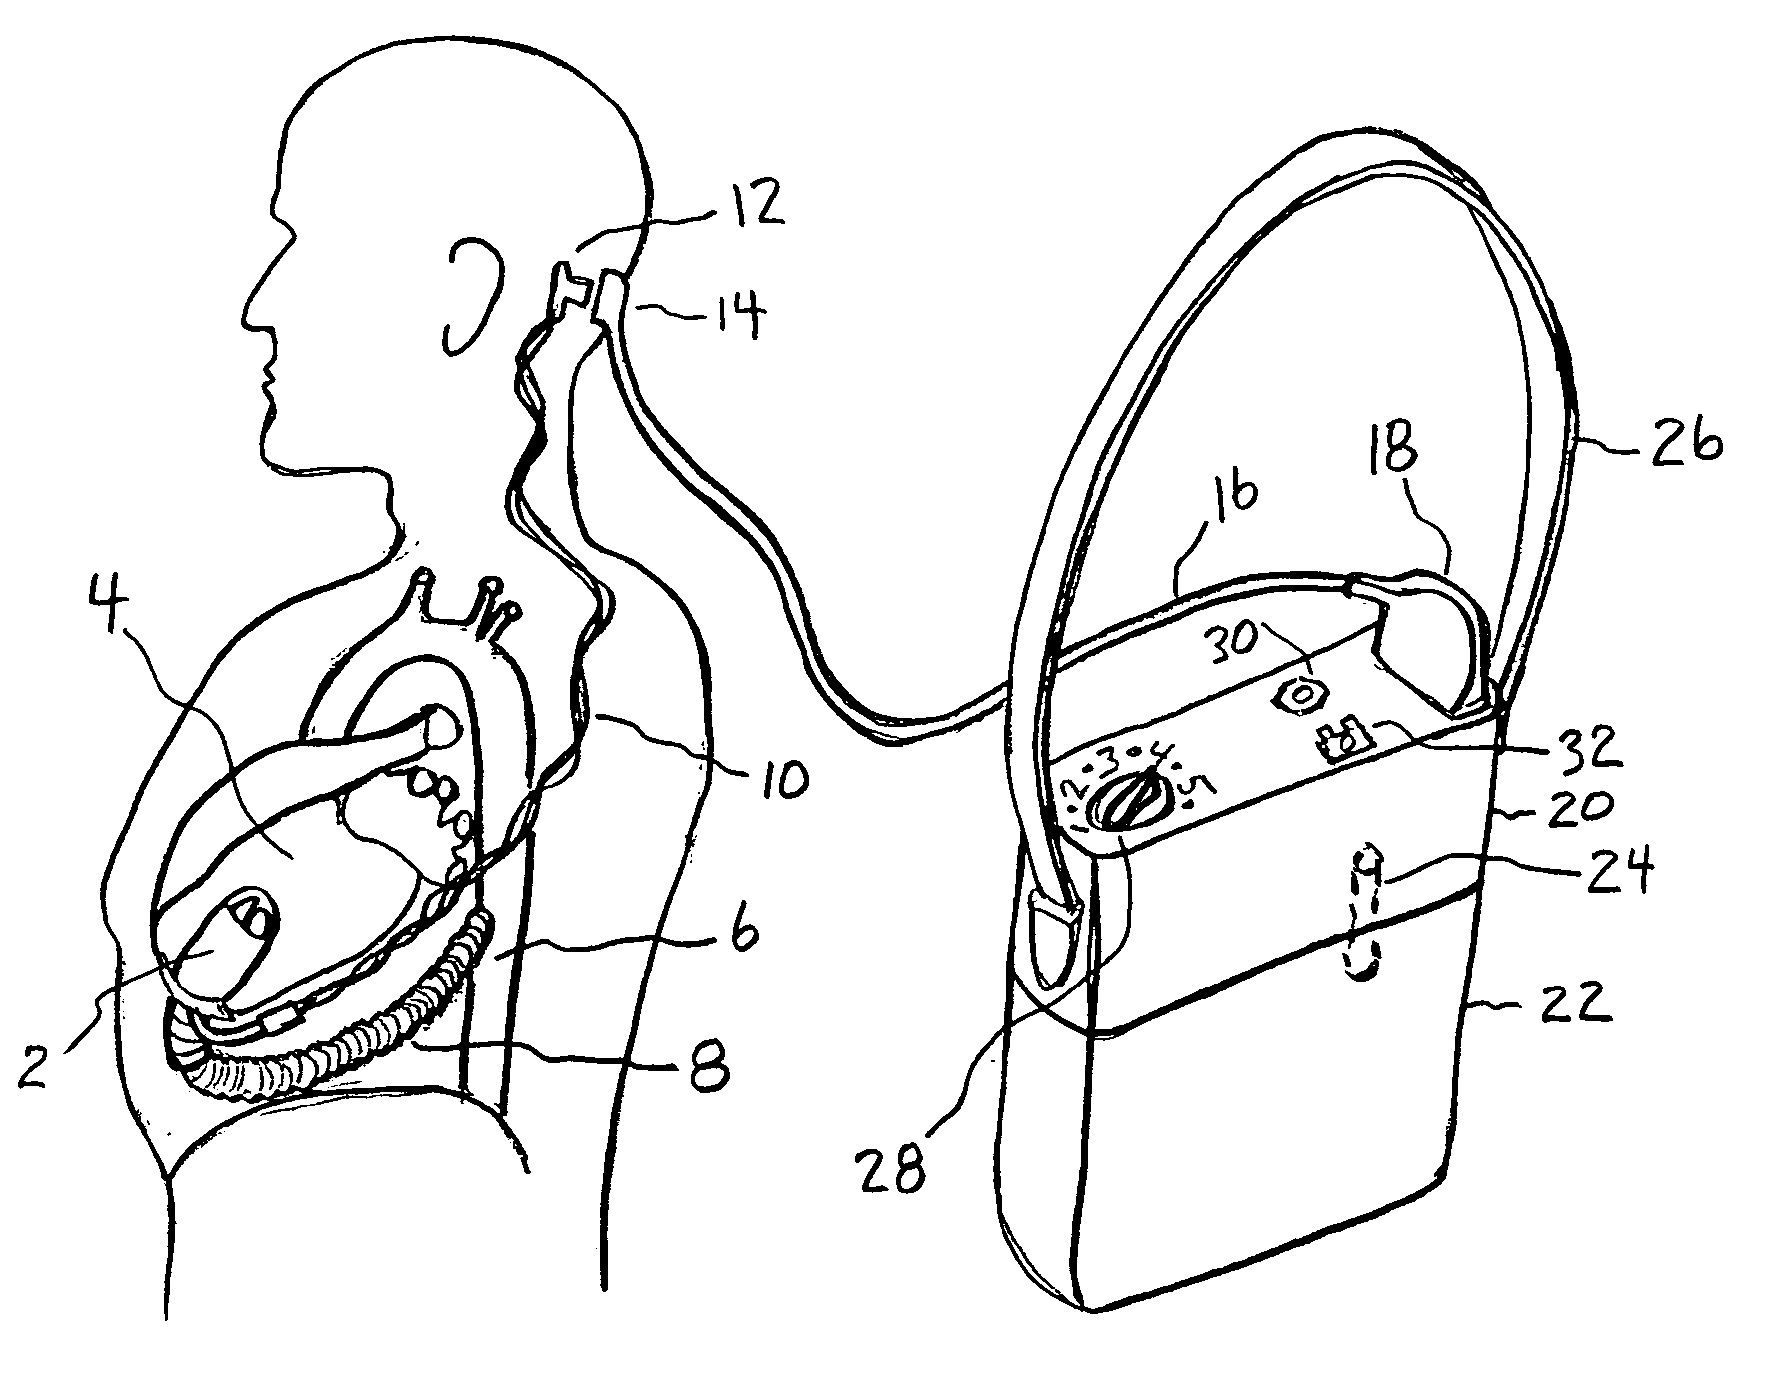 Artificial heart power and control system